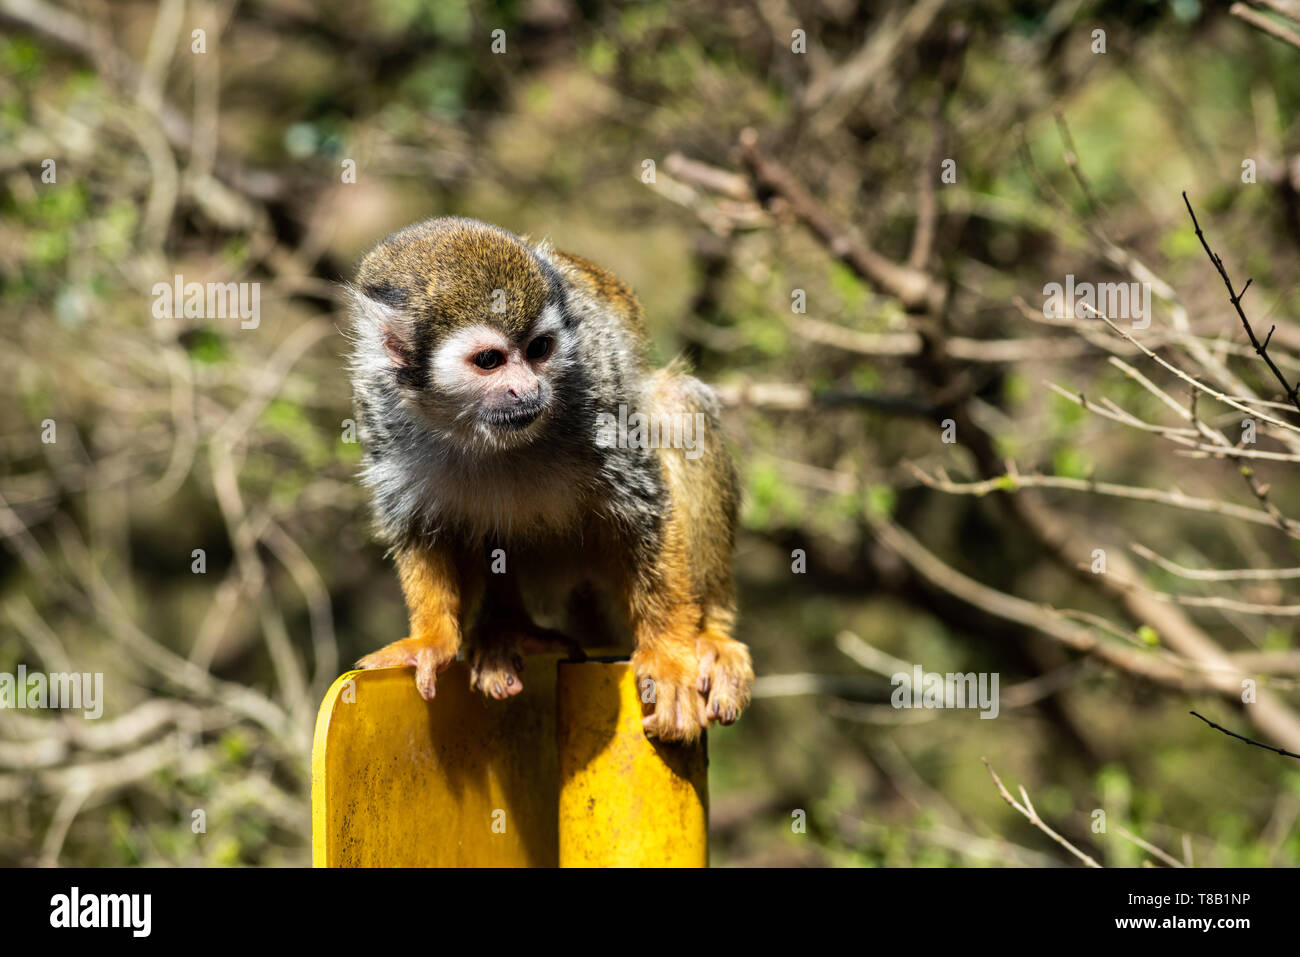 Common squirrel monkey standing on a yellow pole Stock Photo